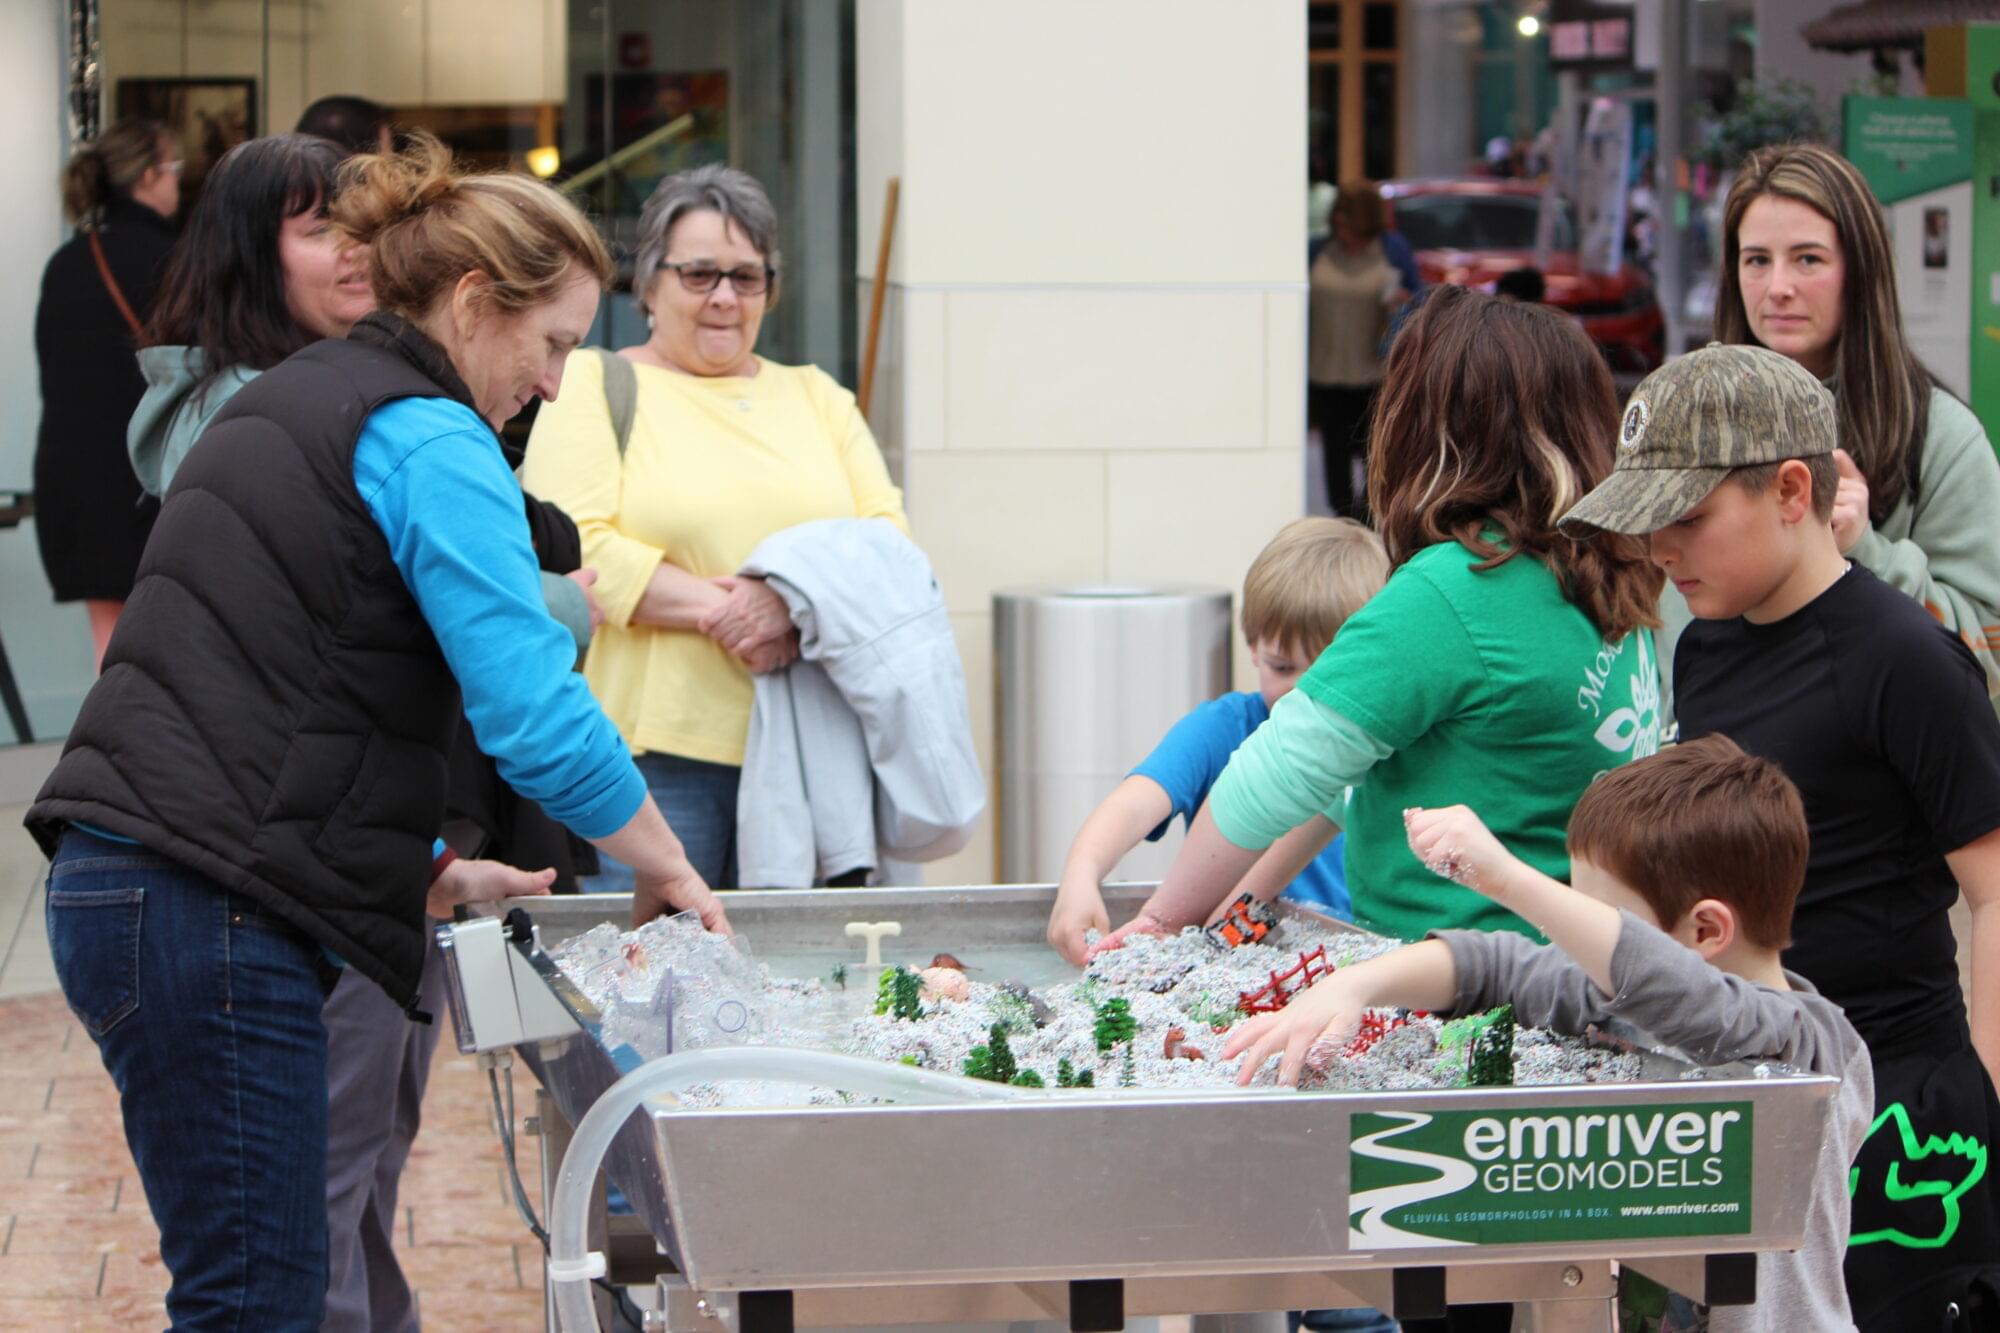 Mall visitors learn about floods and erosion using a hands-on river model.